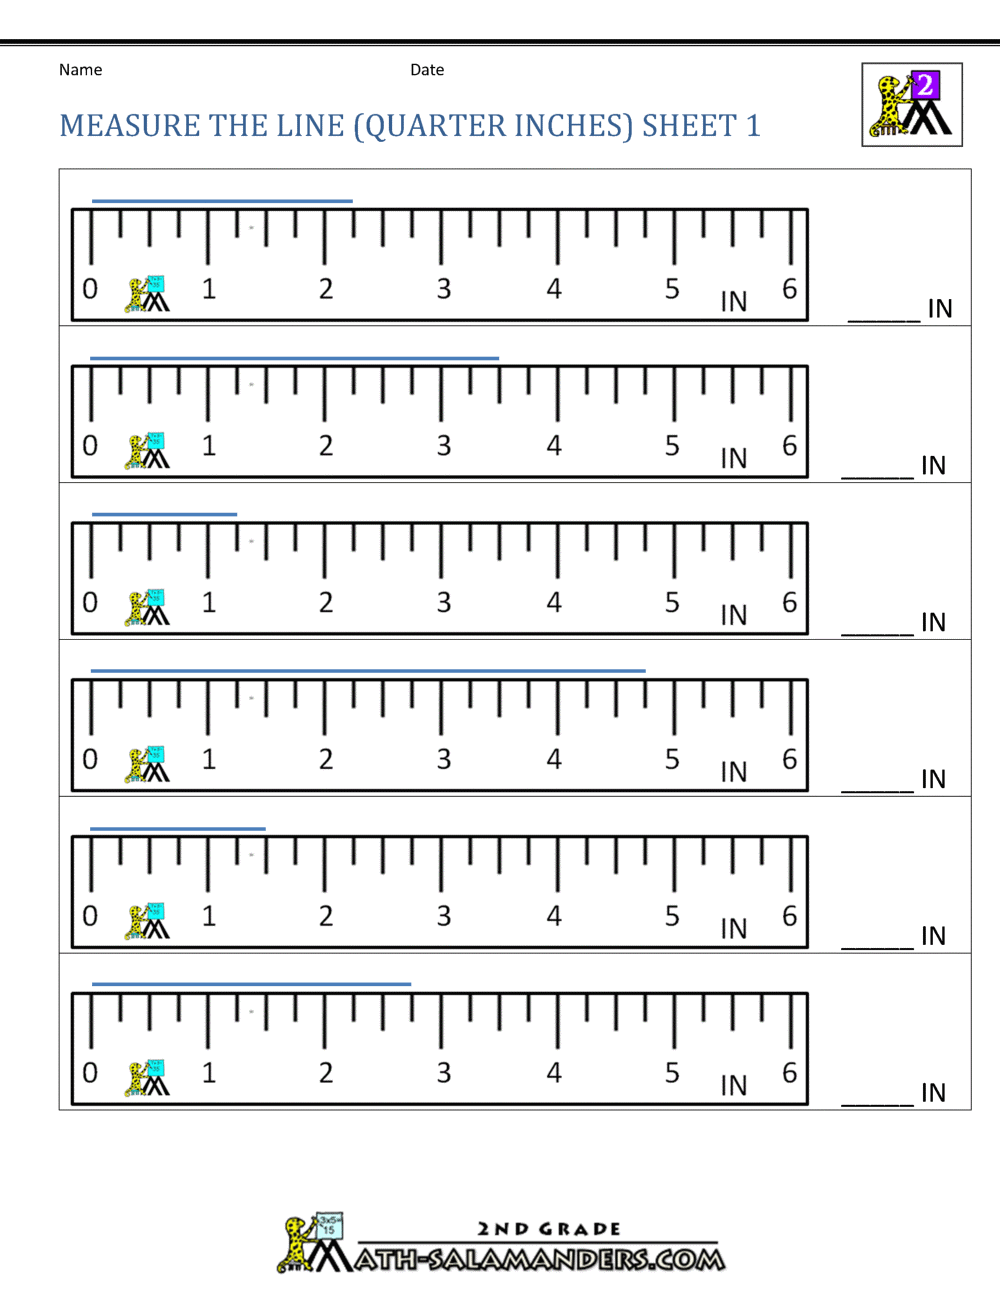 using-a-ruler-to-measure-inches-worksheet